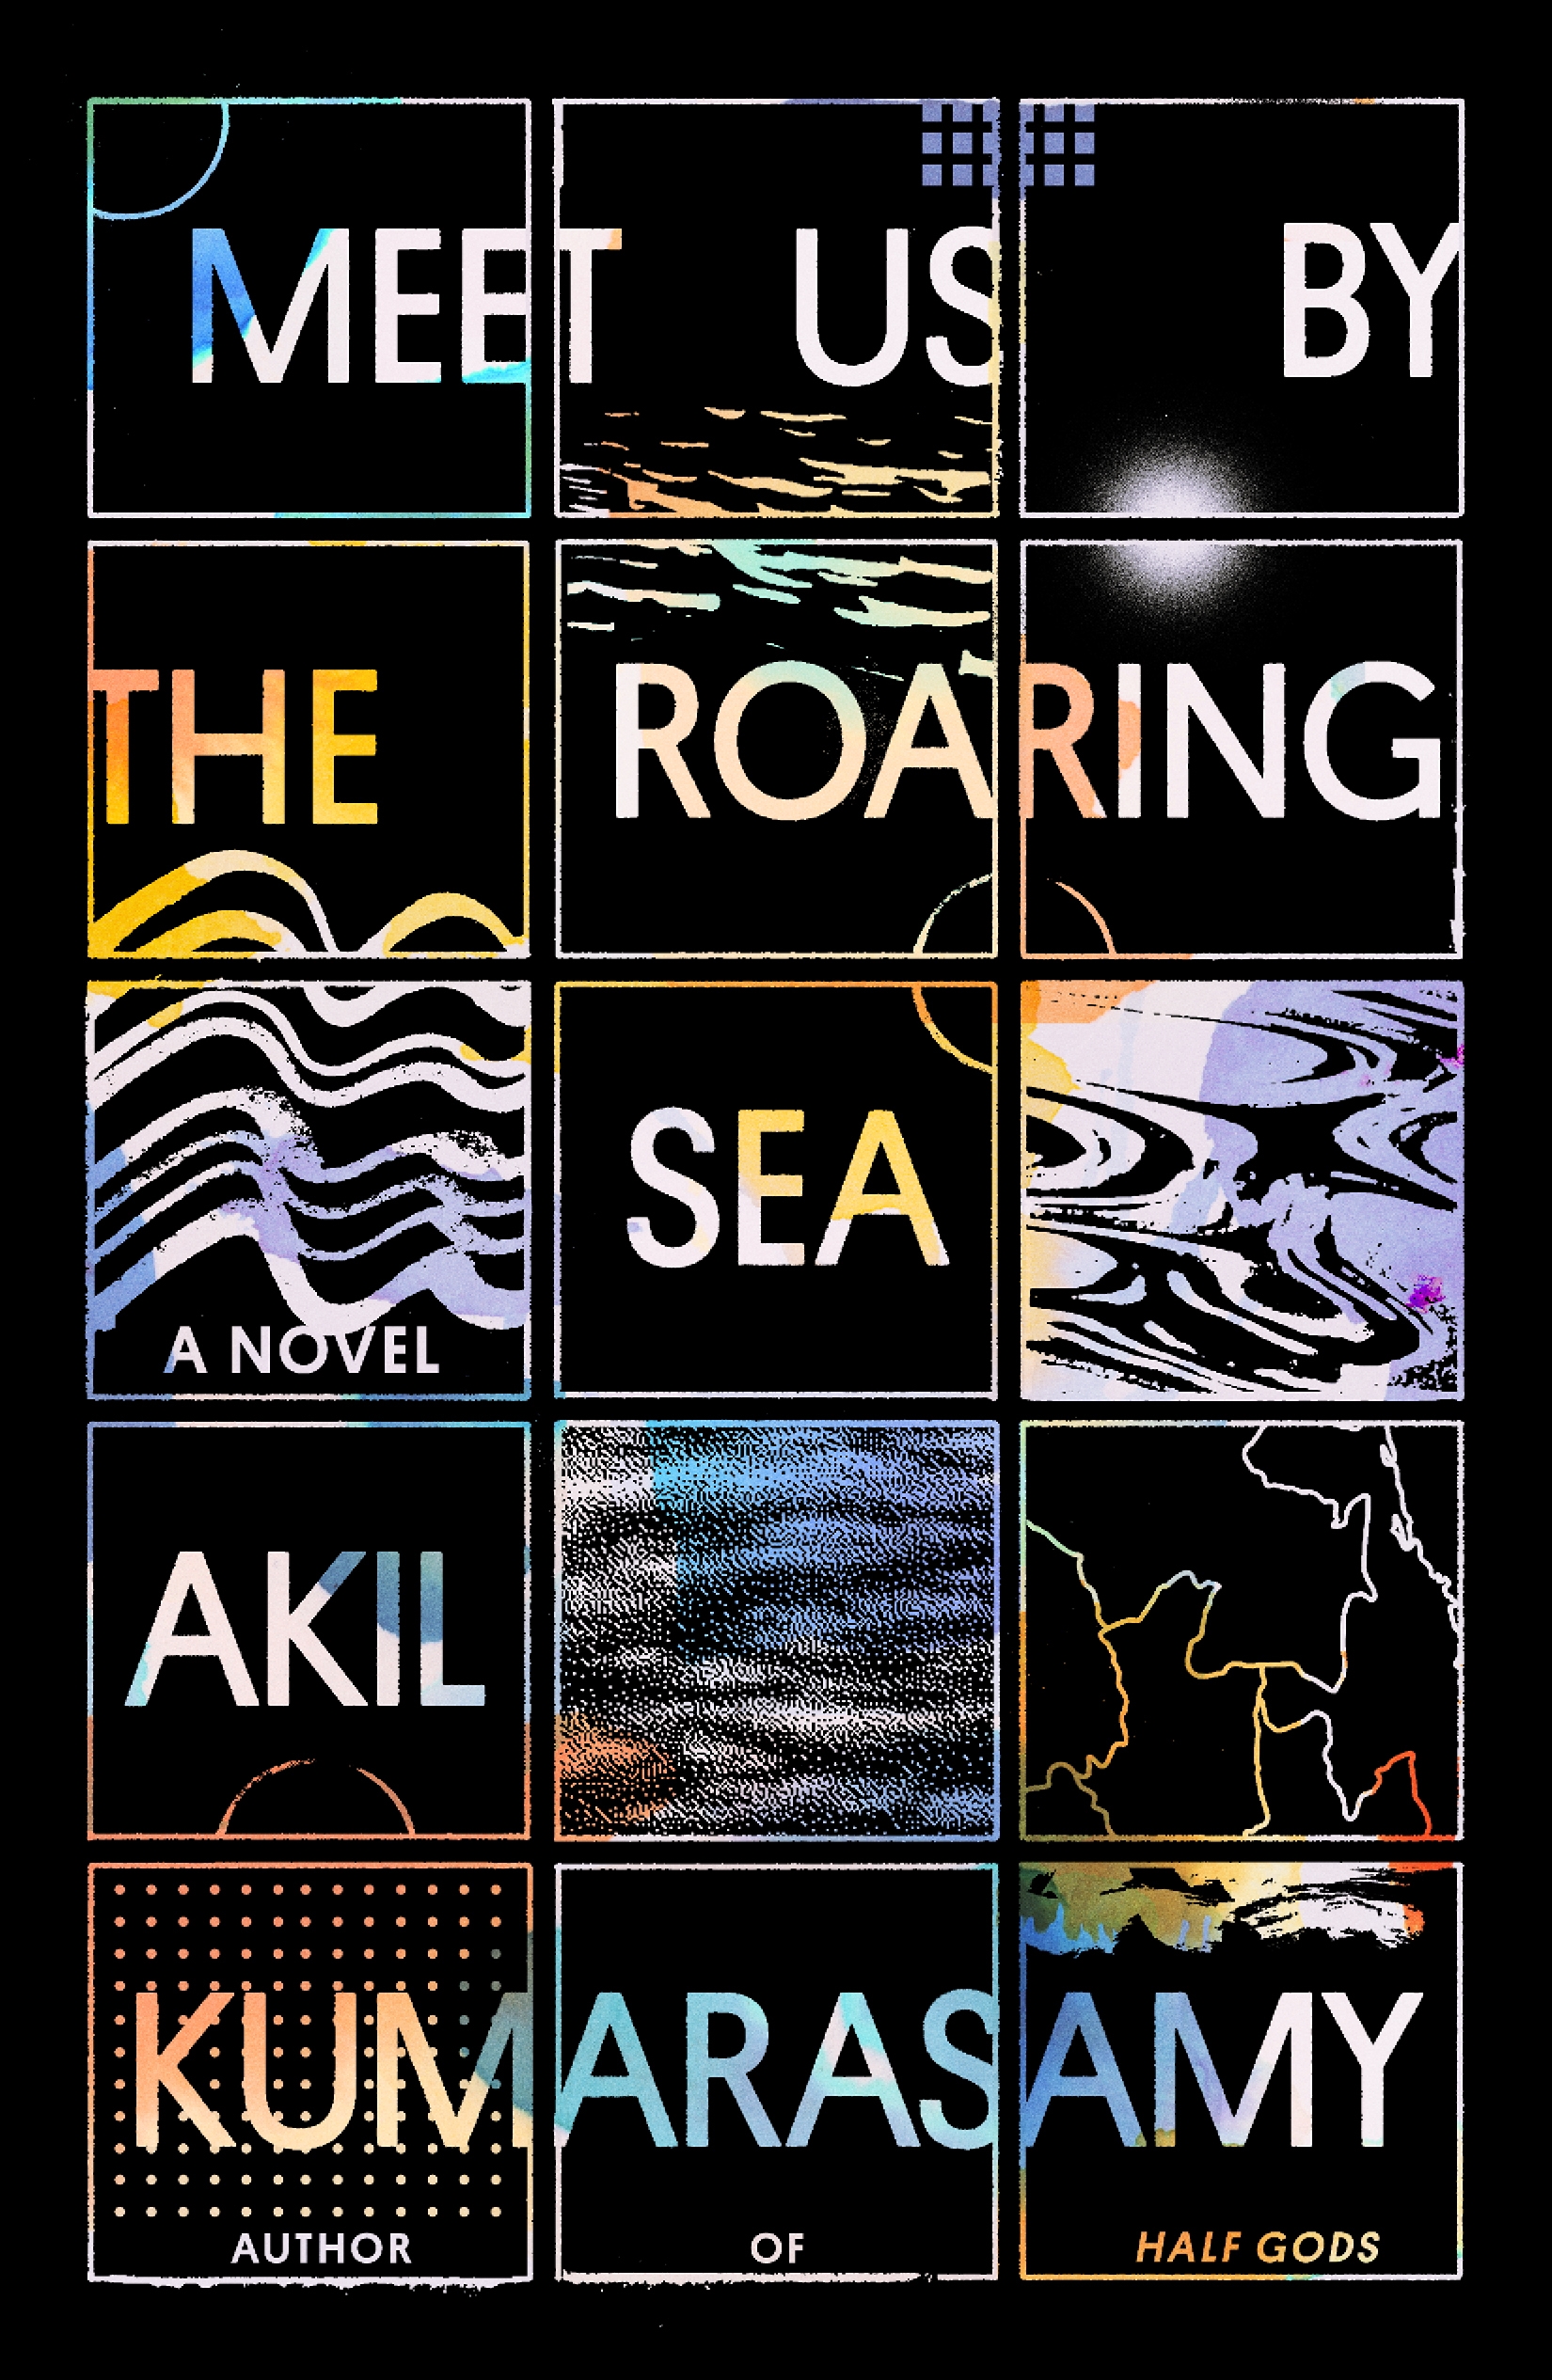 Book Cover Image of “Meet Us By The Roaring Sea”